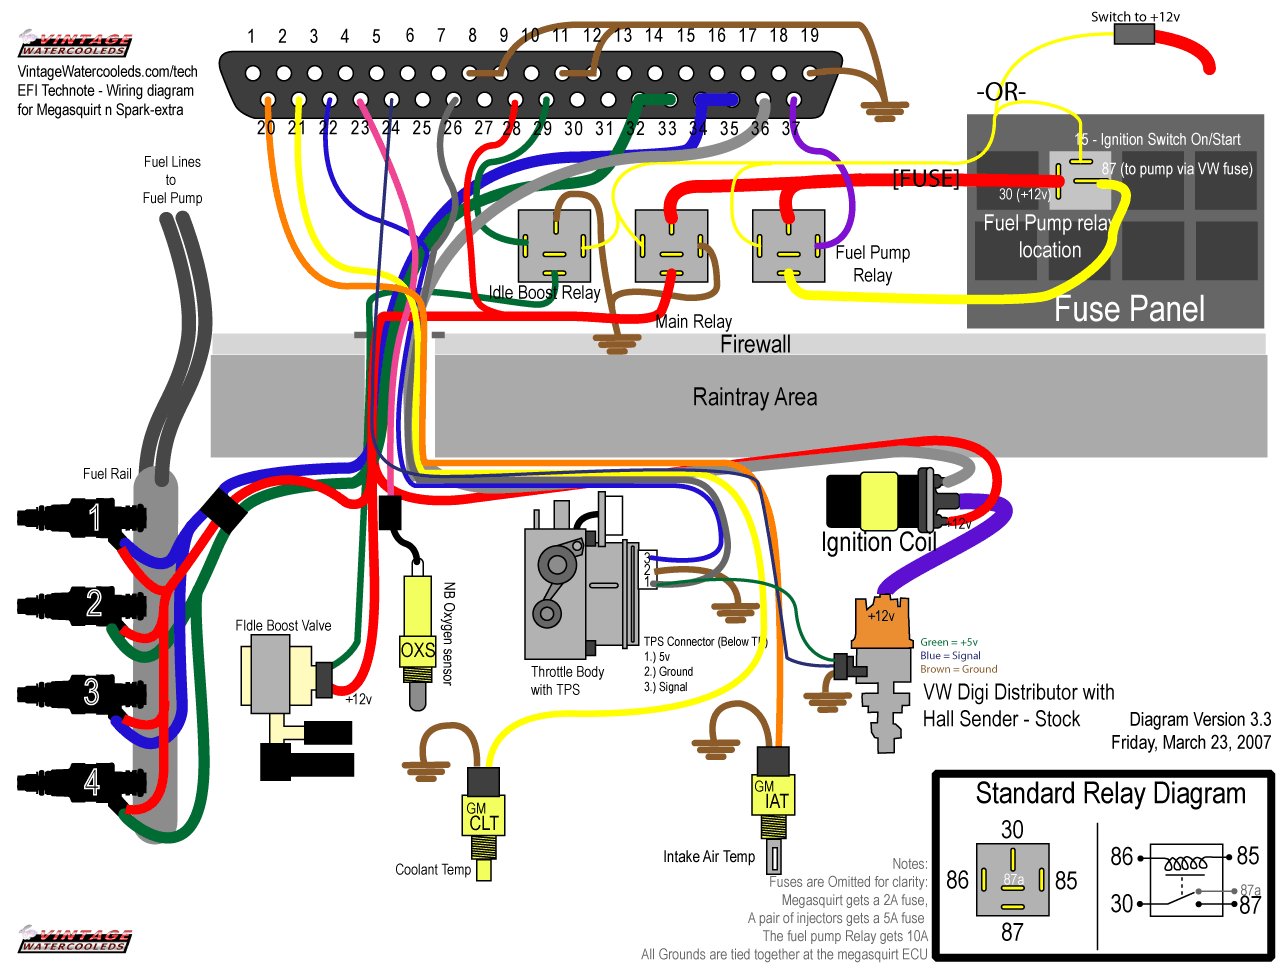 2007 Mazda 3 Wiring Harness For Fuel Pump | Wiring Diagram Photos For ...